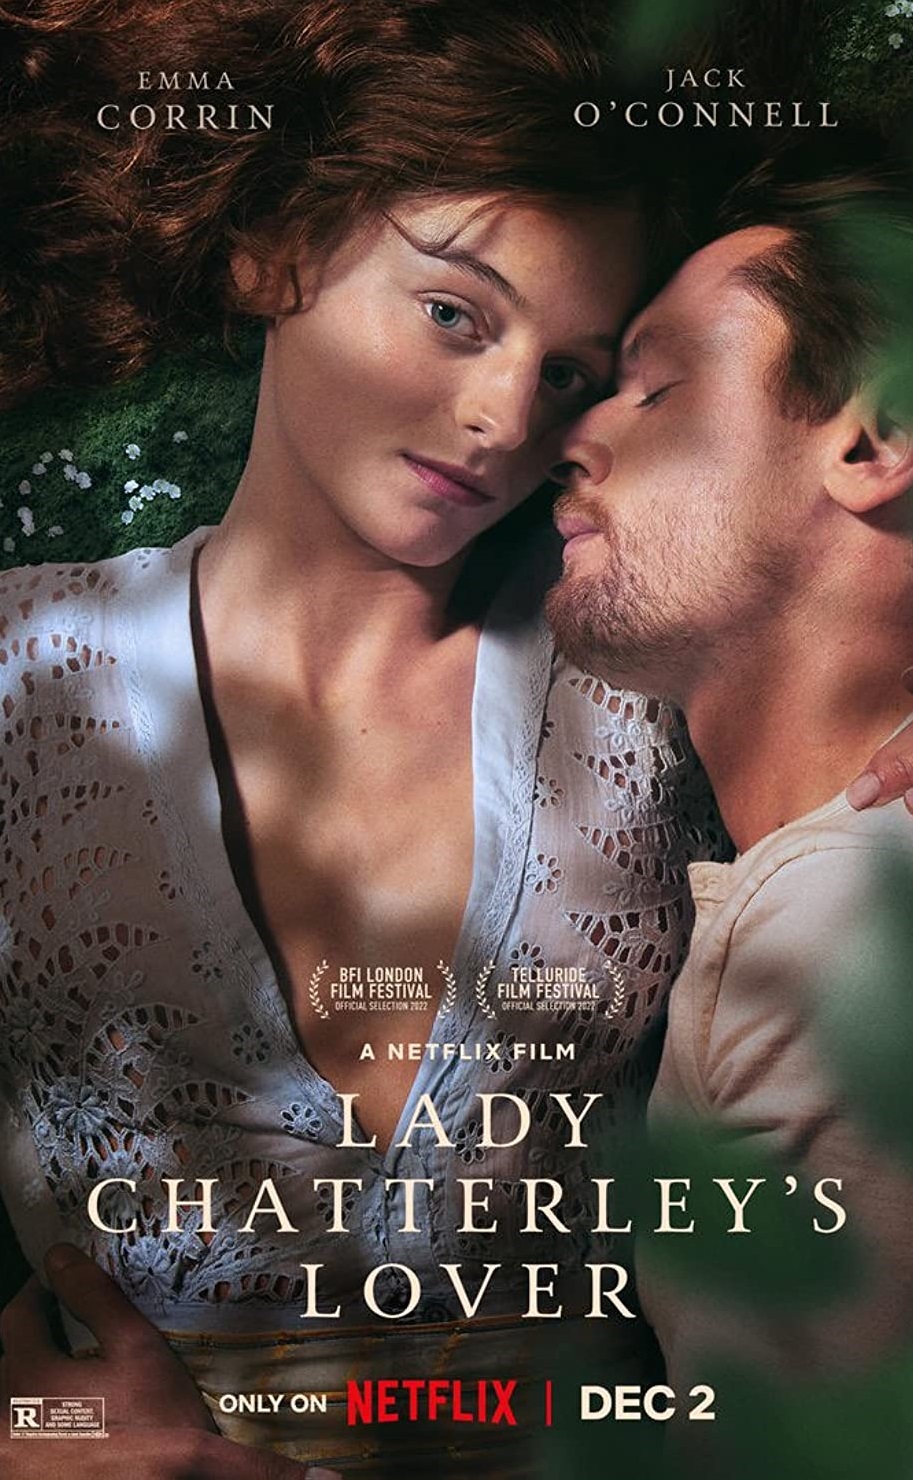 Lady Chatterleys Lover 2022 Tamil Dubbed Romance Movie Online